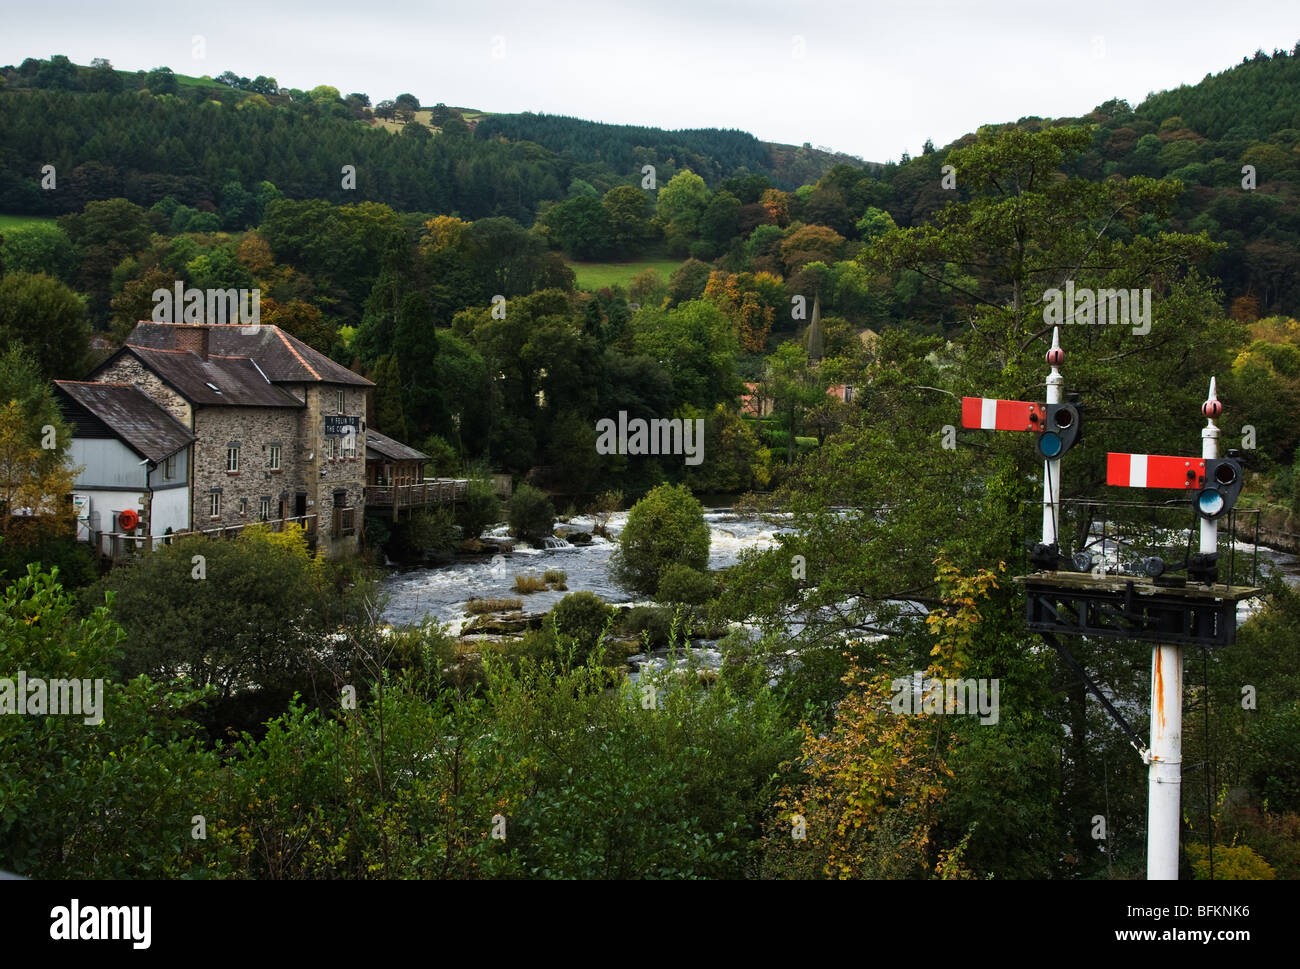 The old Corn Mill building in Llangollen by the river and including railway signals from the nearby steam railway Stock Photo